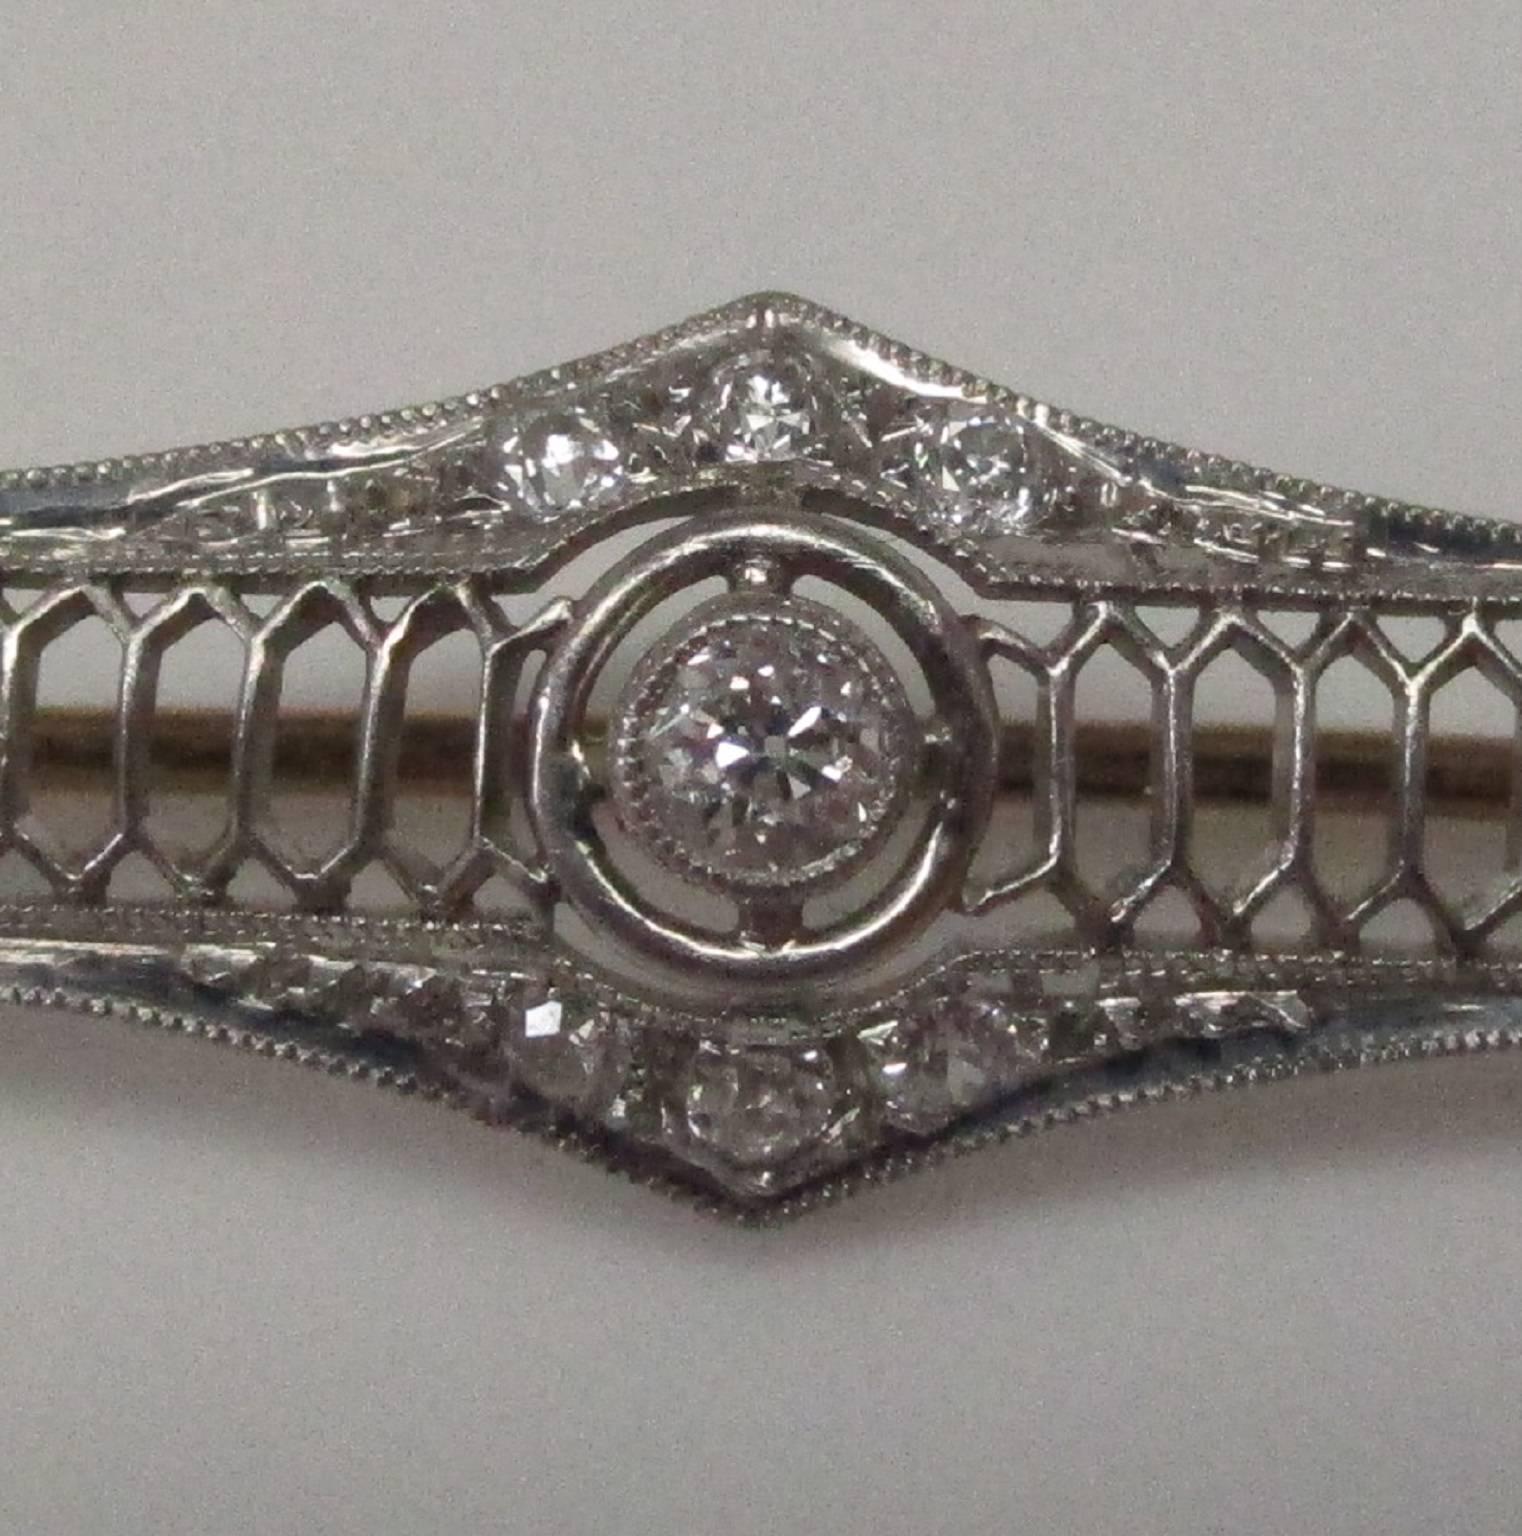 This is a beautiful example of Edwardian craftsmanship. This pin has been hand carved, not stamped. It features 19 diamonds with a total weight of 1.50 carat, G color and VS1 clarity. The pin findings are made of 14K rose gold. A work of art from a